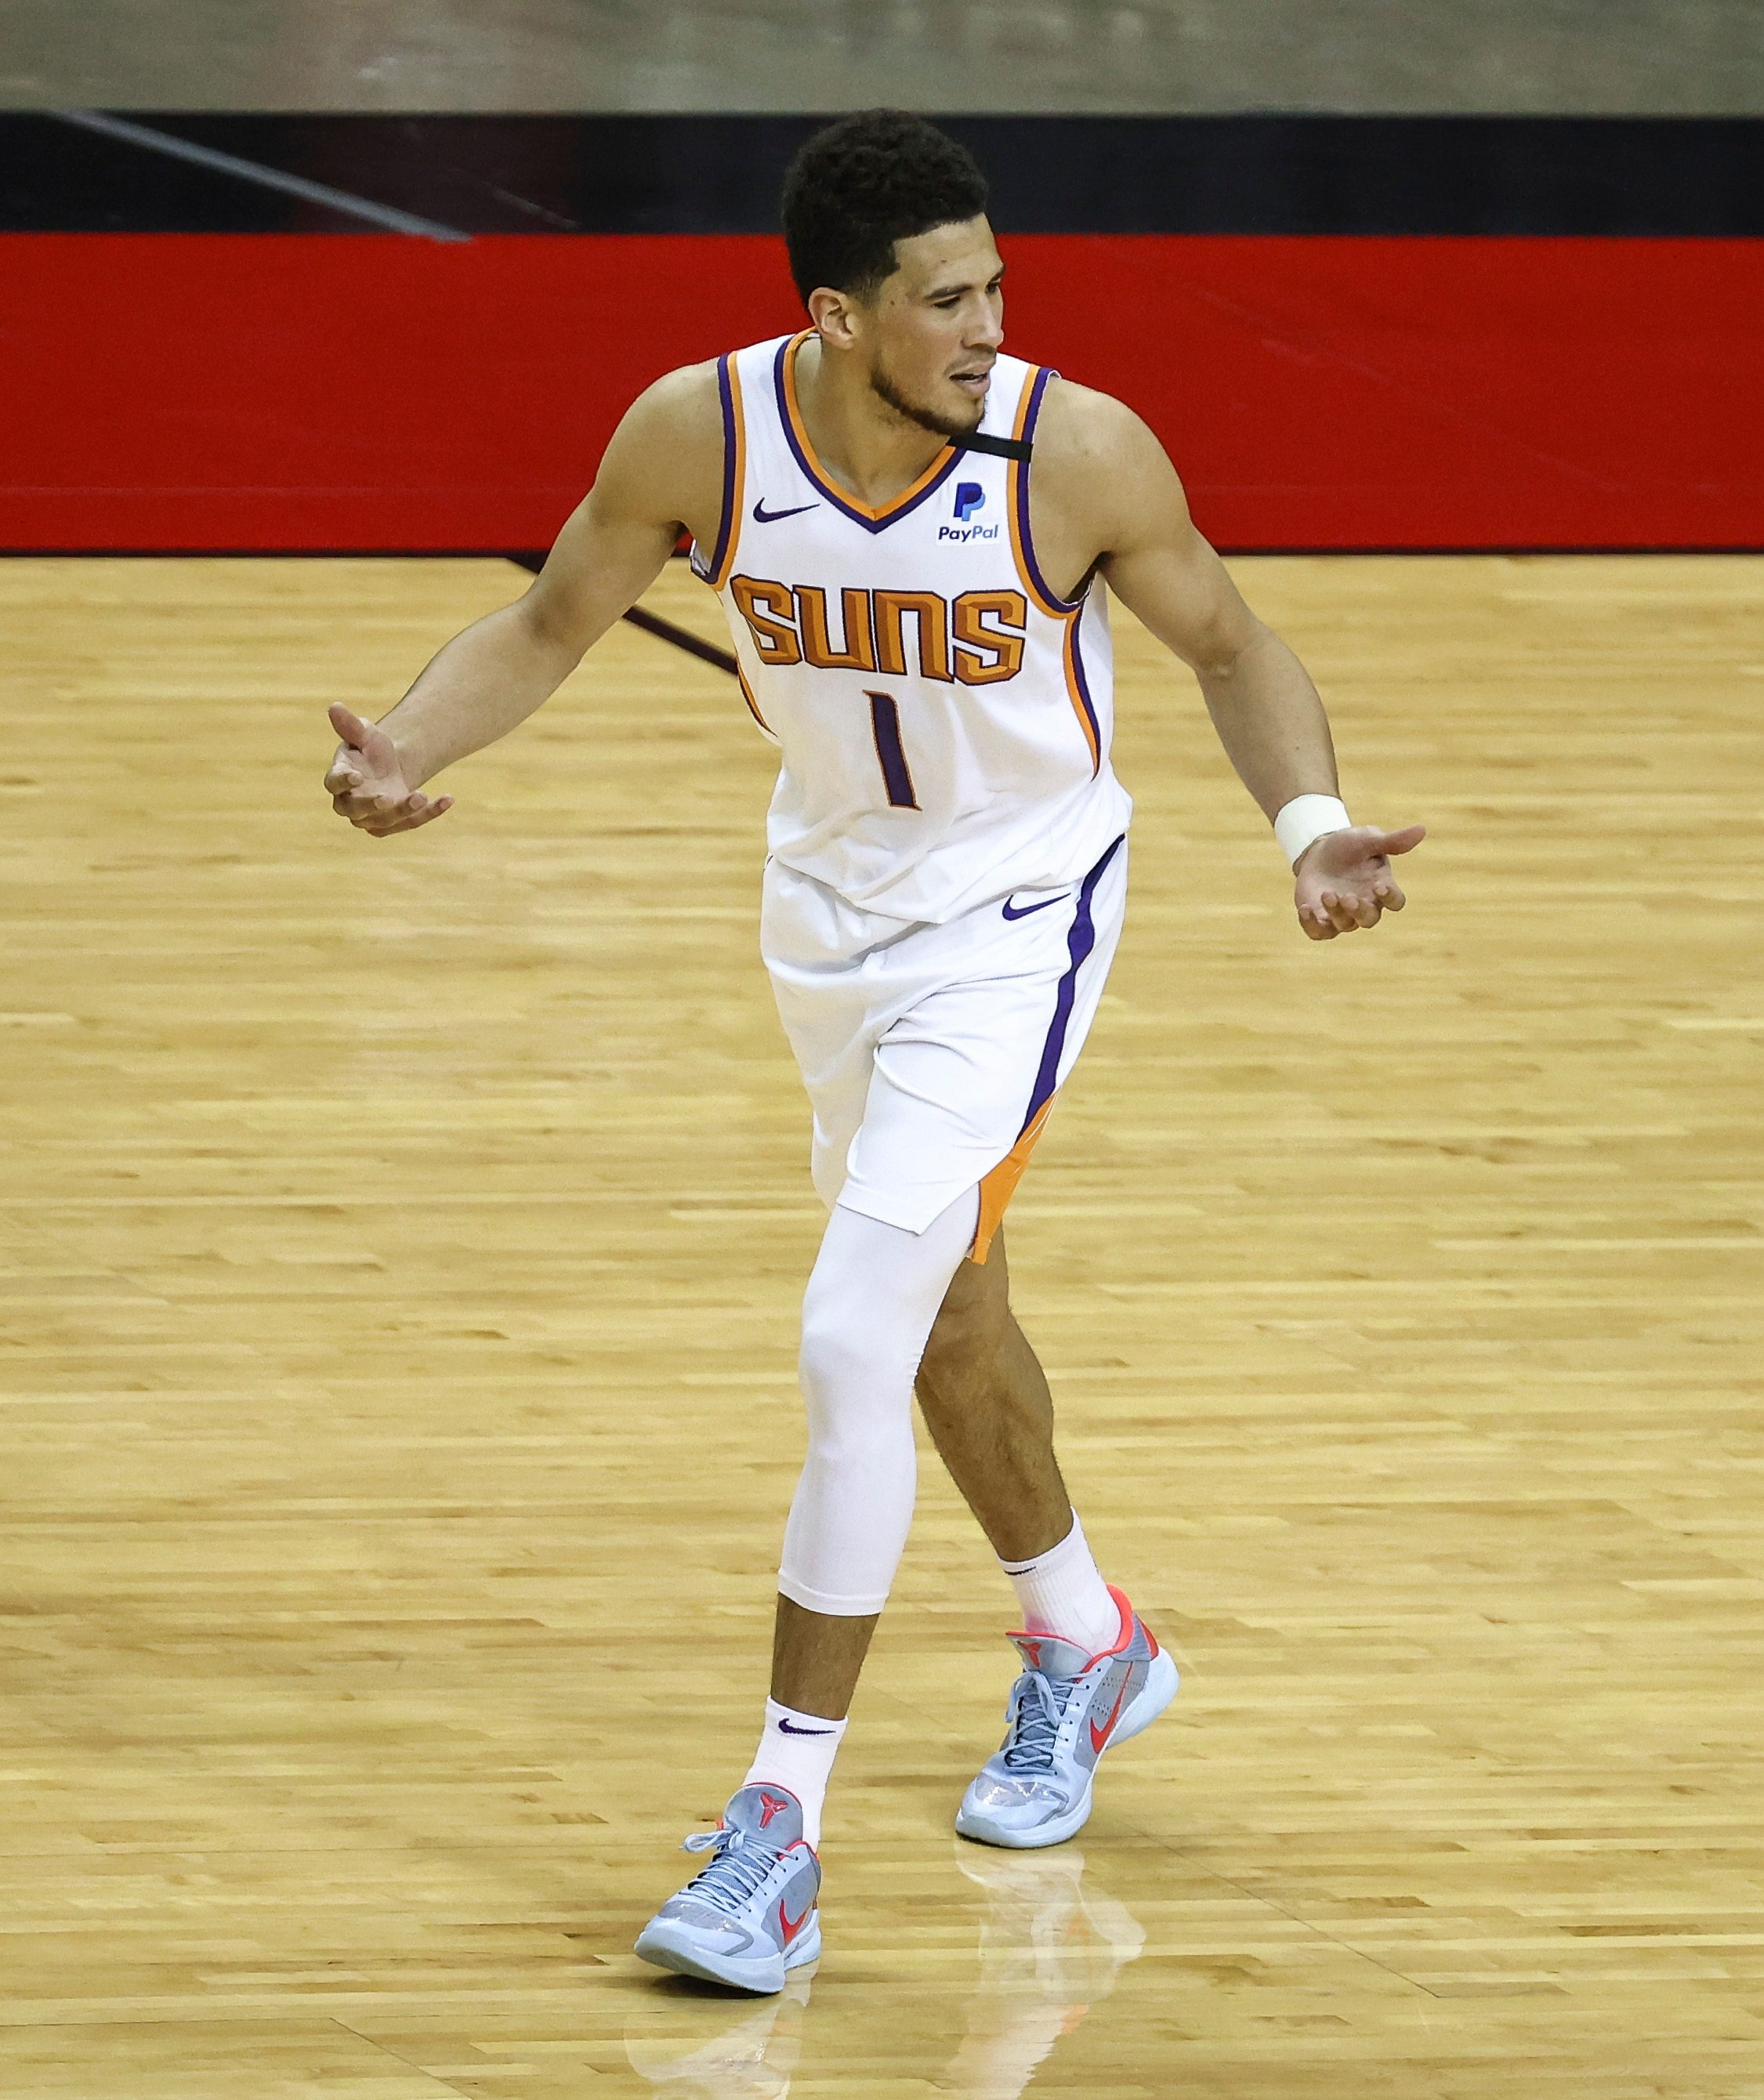 Devin Booker’s last-second free throw lifts Suns over Bucks in OT